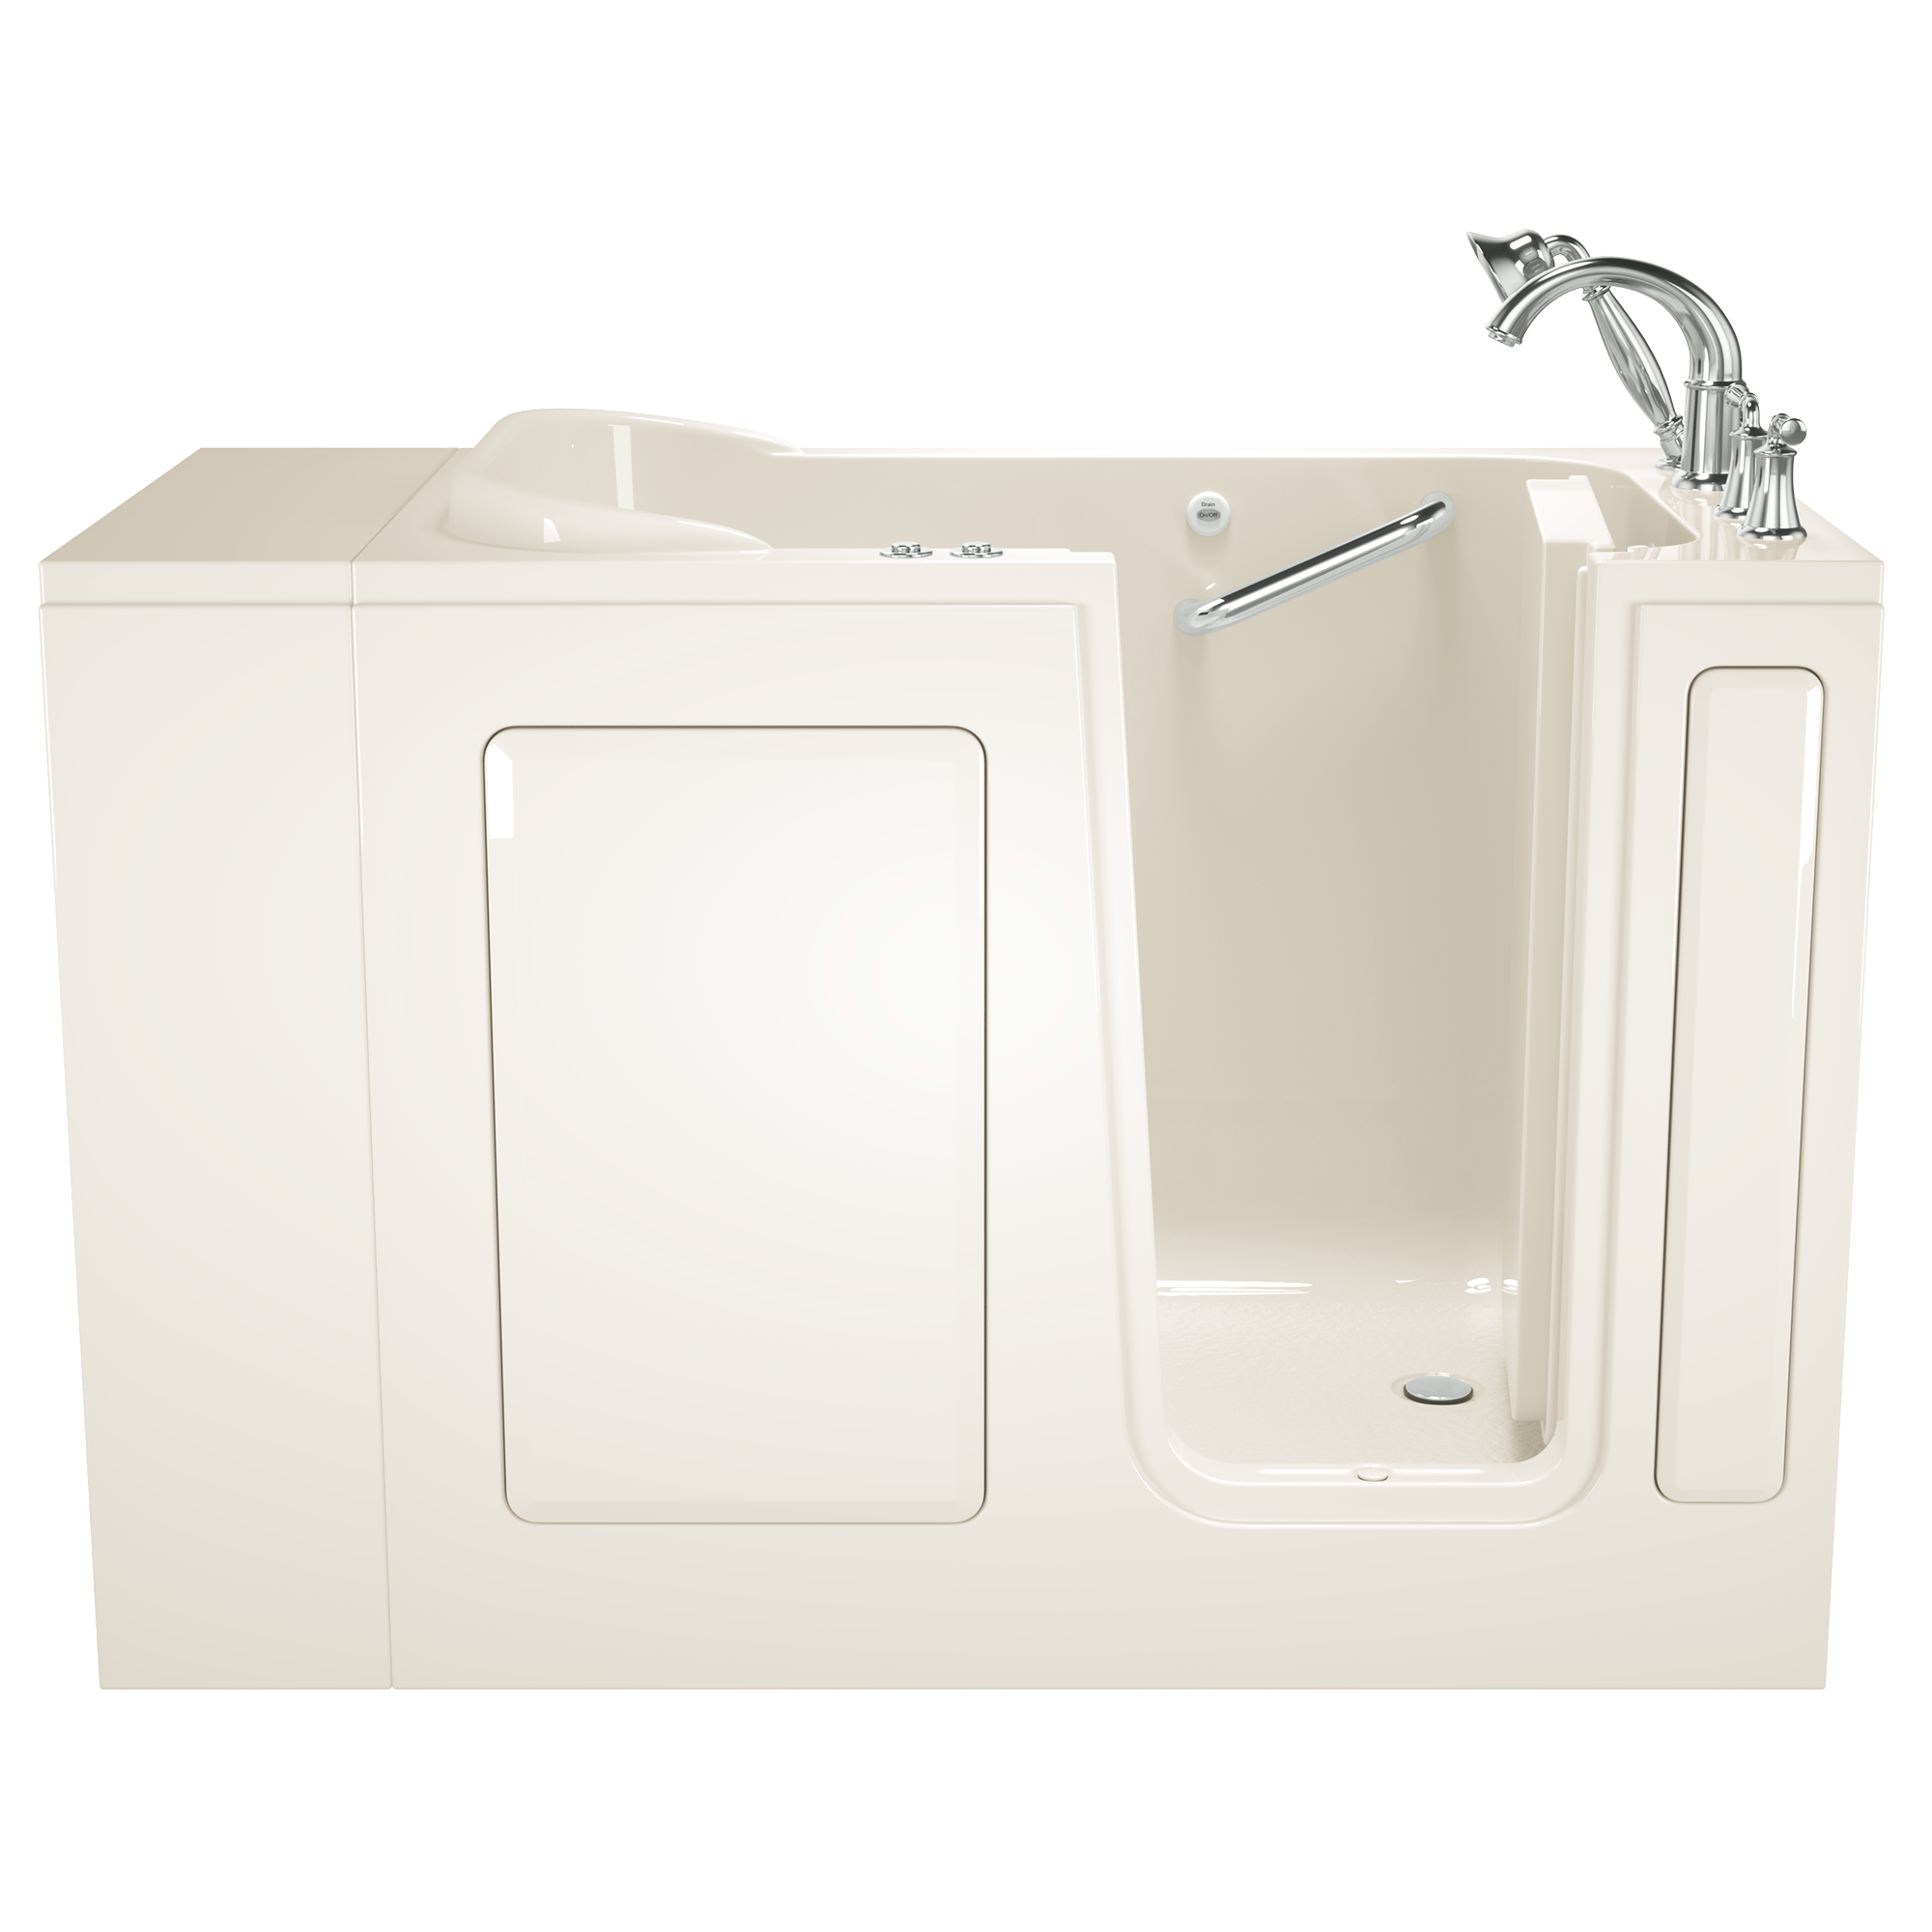 Gelcoat Value Series 28x48 Inch Walk in Bathtub with Combination Air Spa and Whirlpool System  Right Hand Door and Drain WIB LINEN